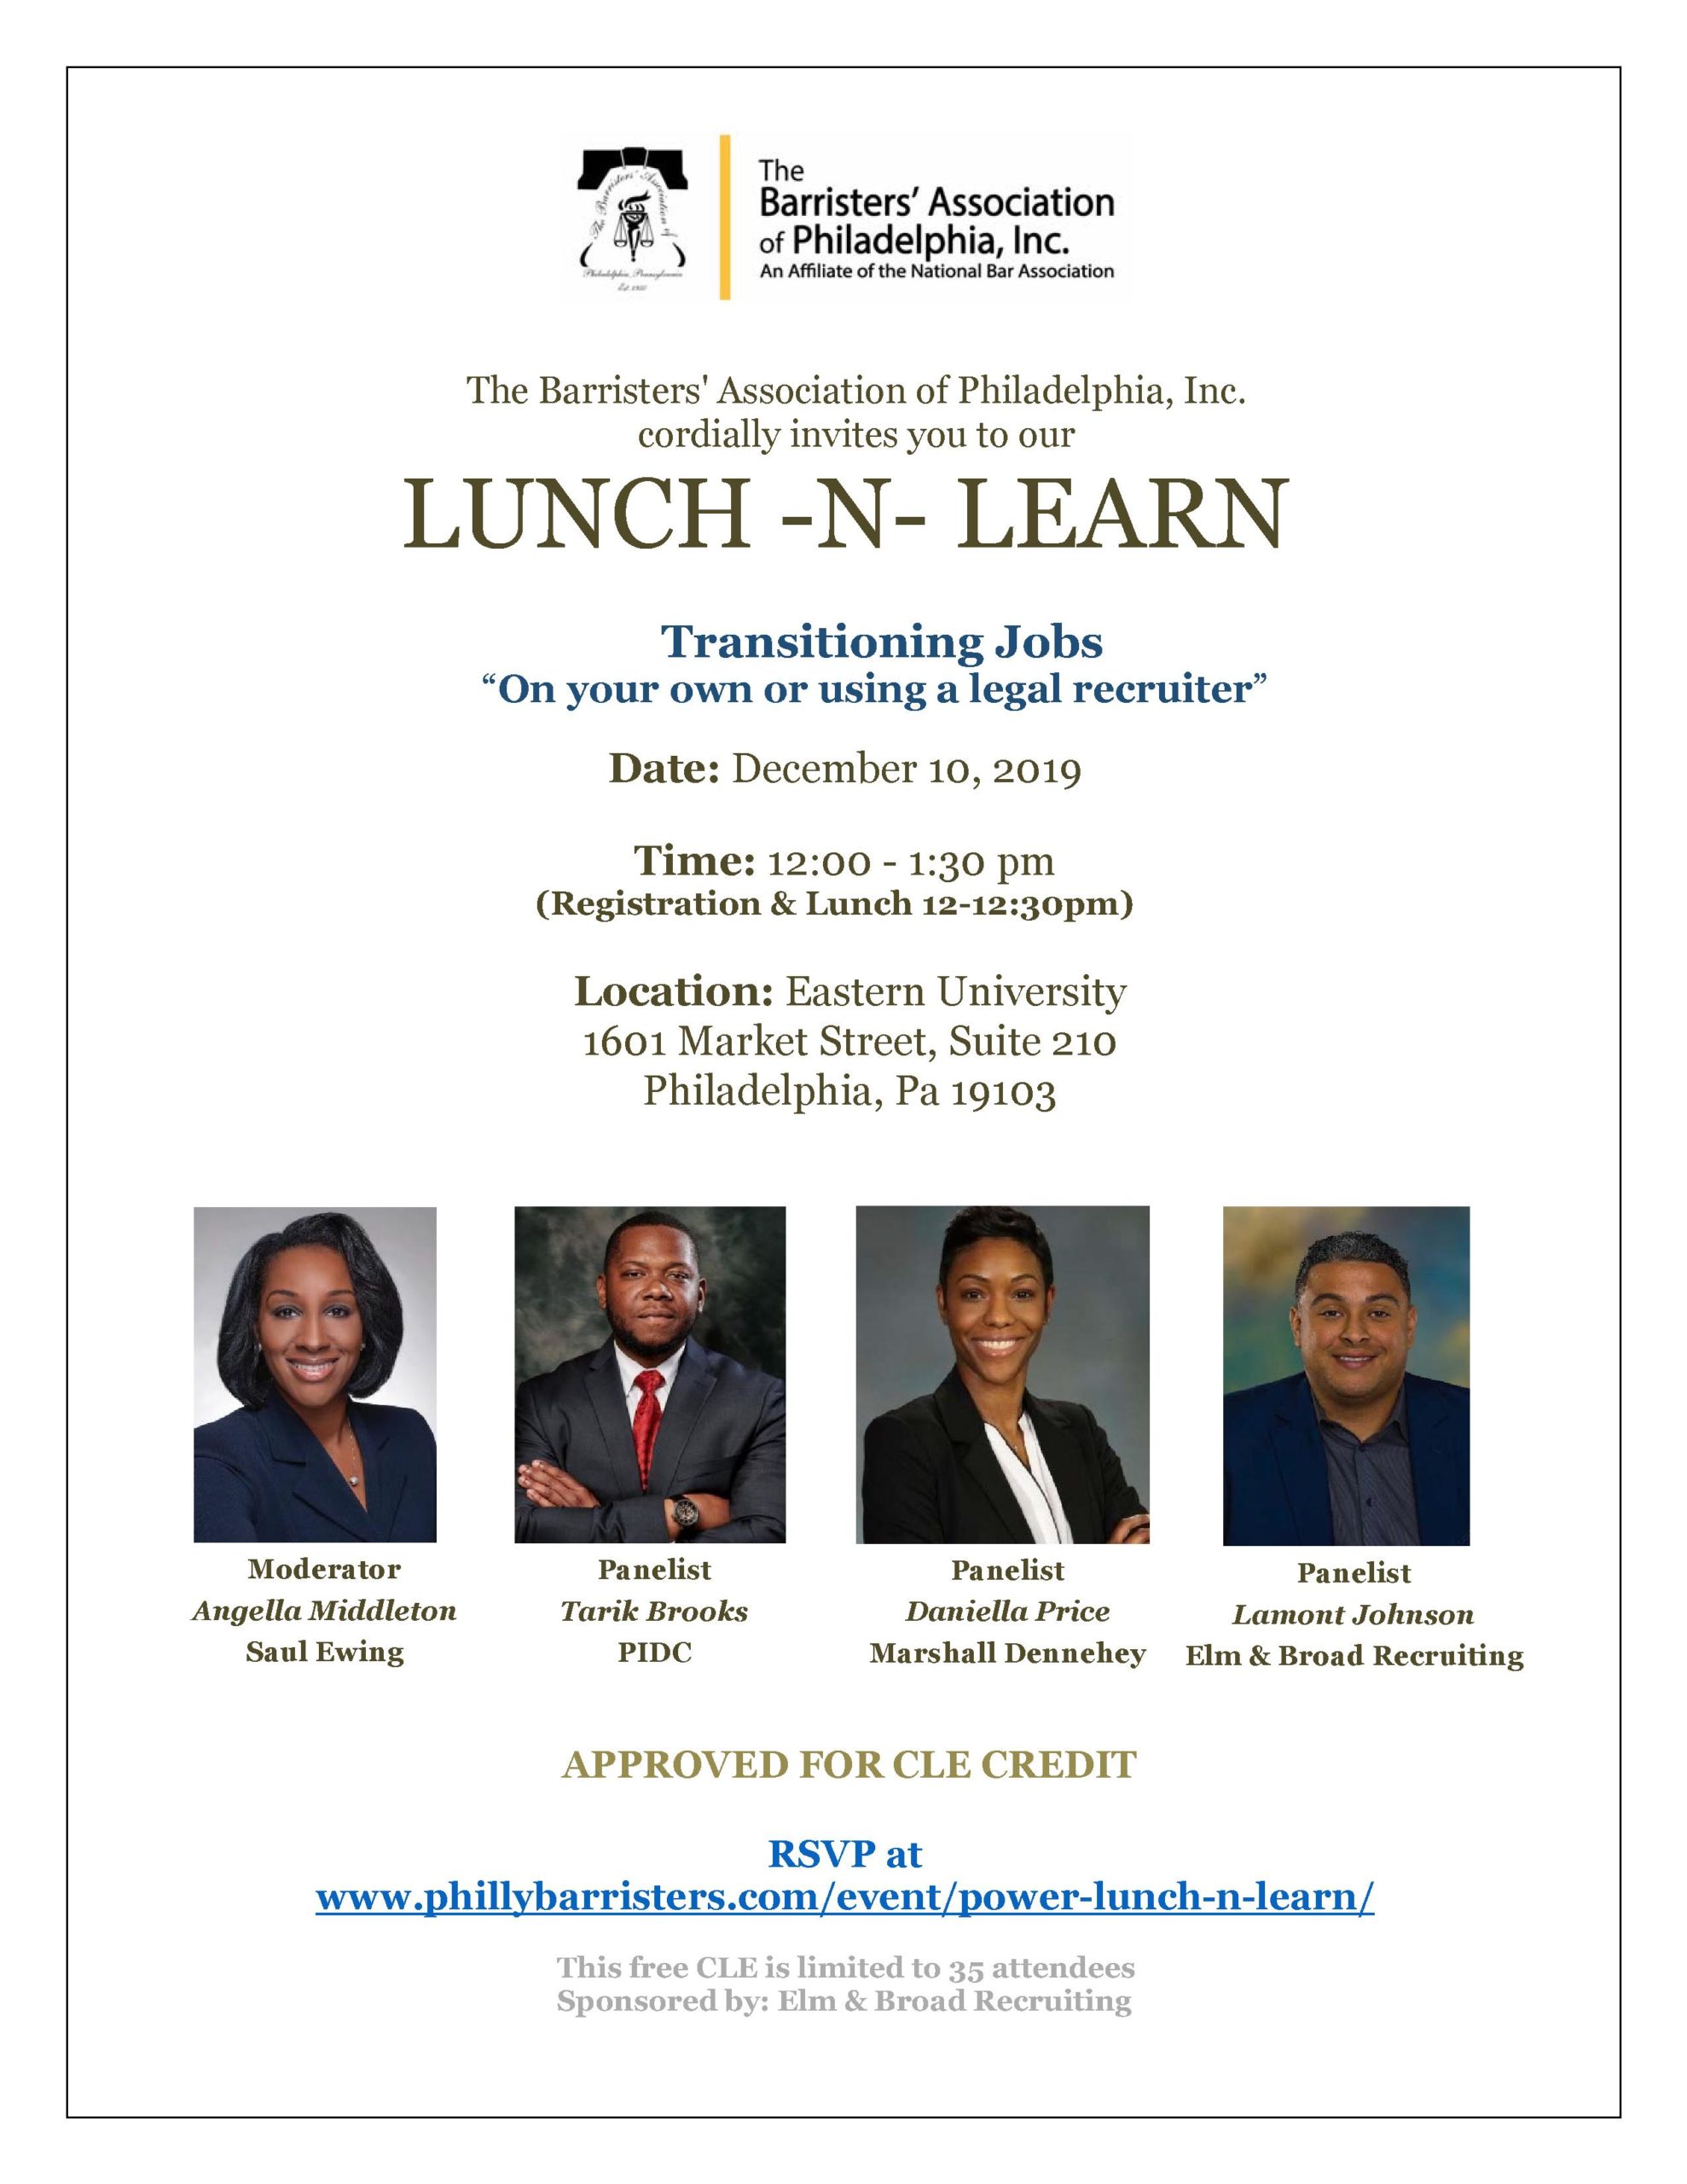 “Transitioning Jobs: On your own or using a legal recruiter” Lunch-n-Learn CLE